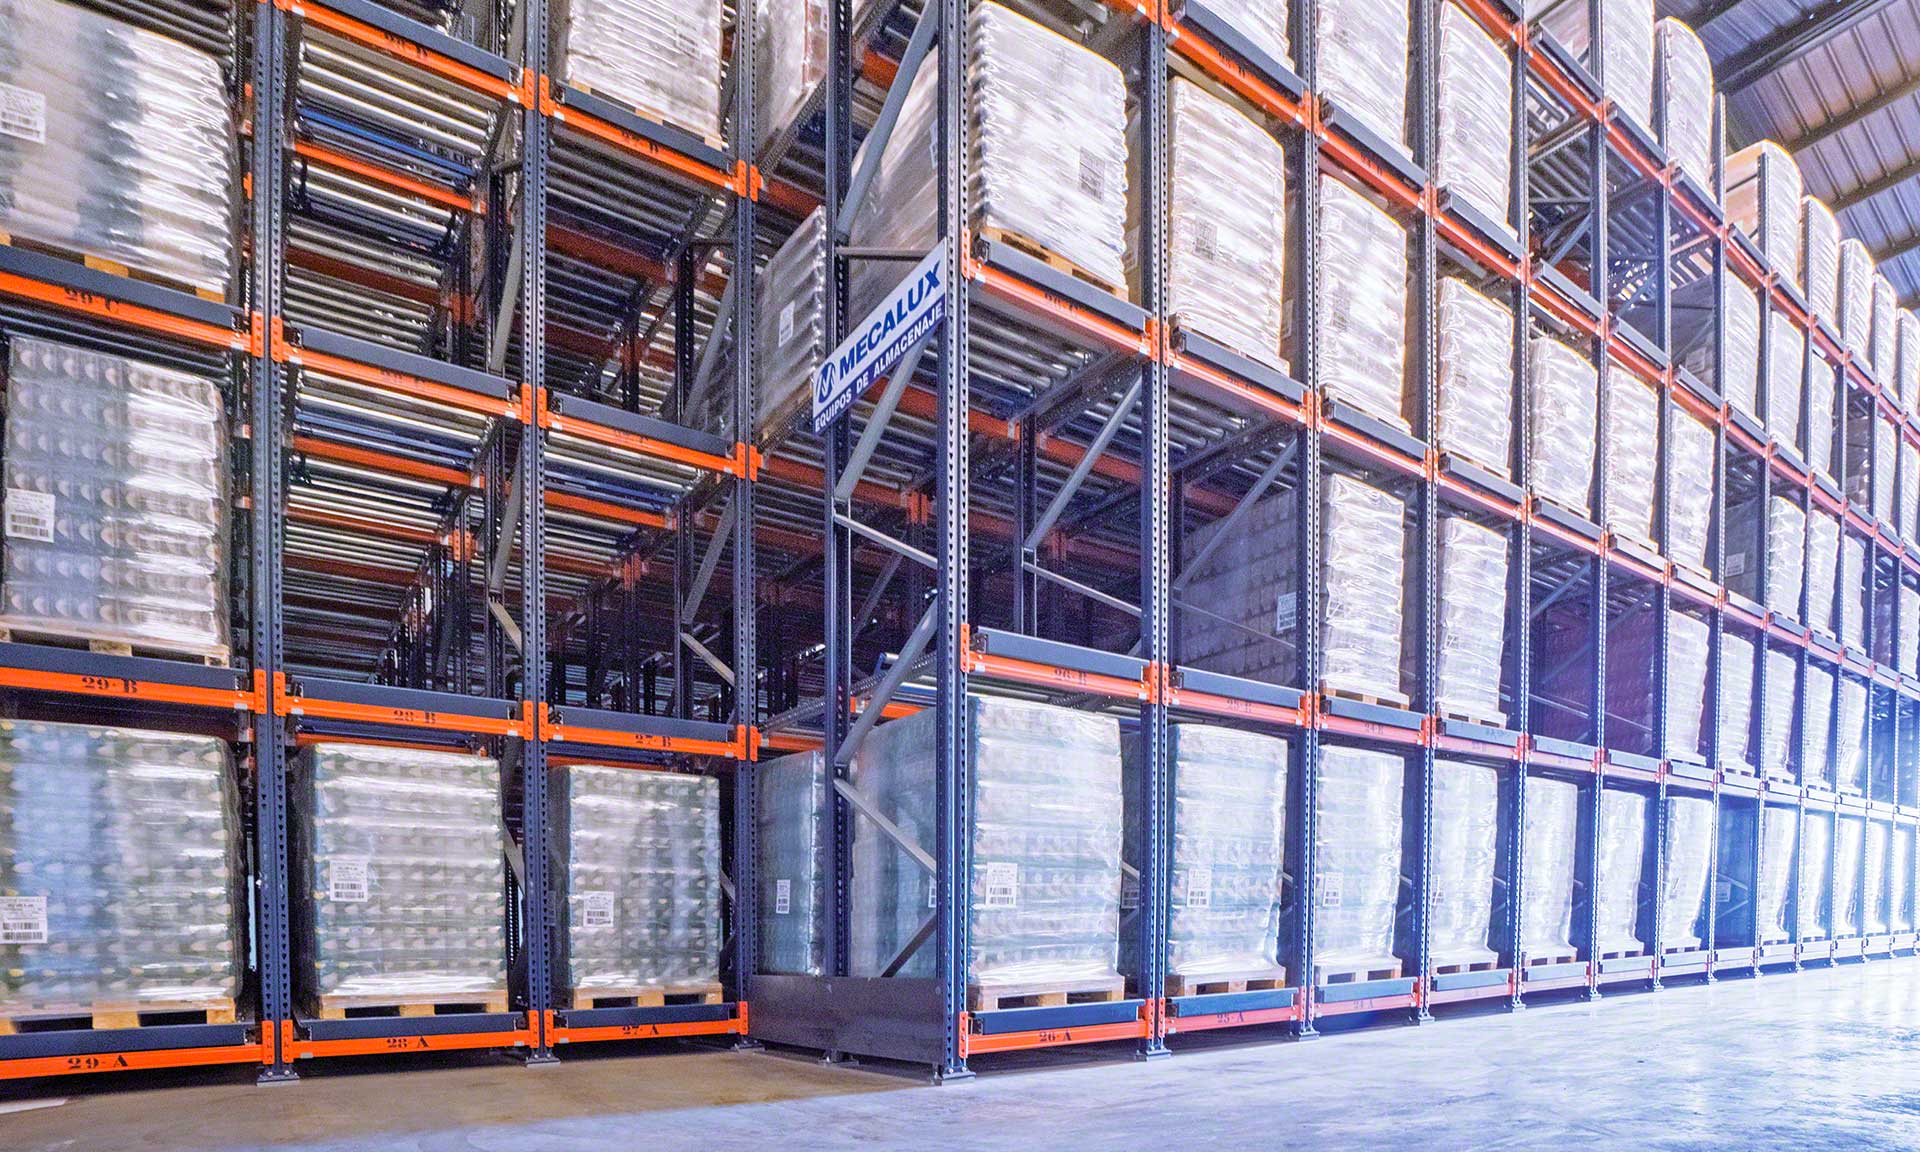 Dacsa is on a roll using Mecalux's live racking with rollers